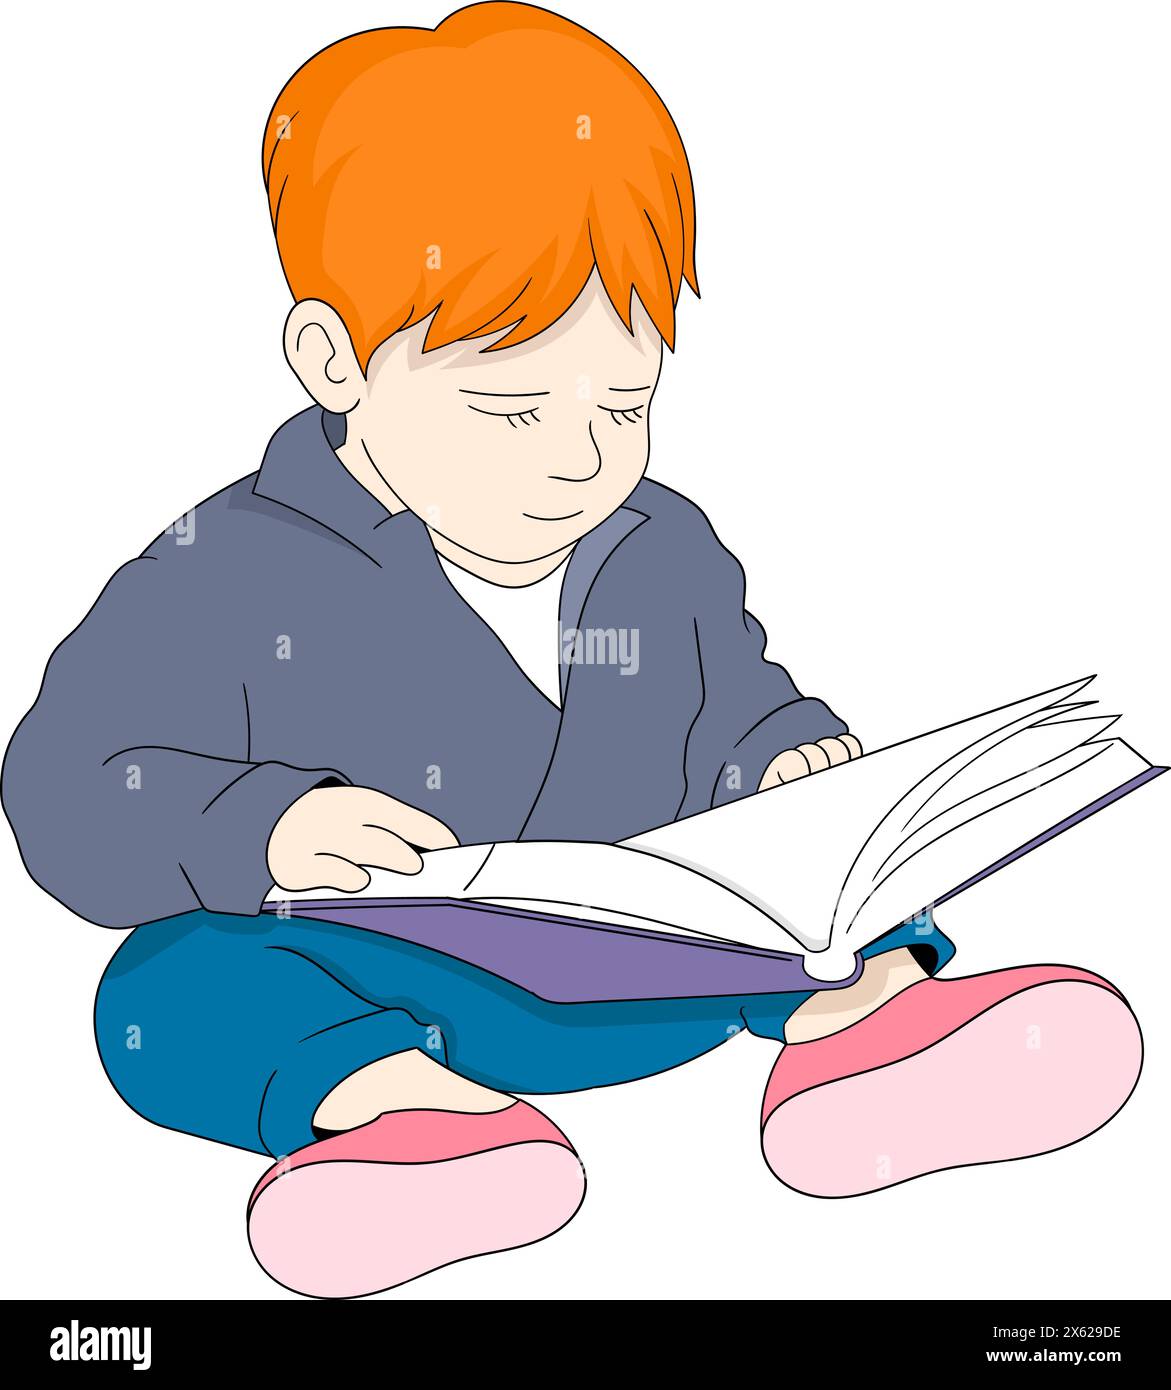 educational cartoon doodle illustration, child is sitting reading a book studying mathematics, creative drawing Stock Vector